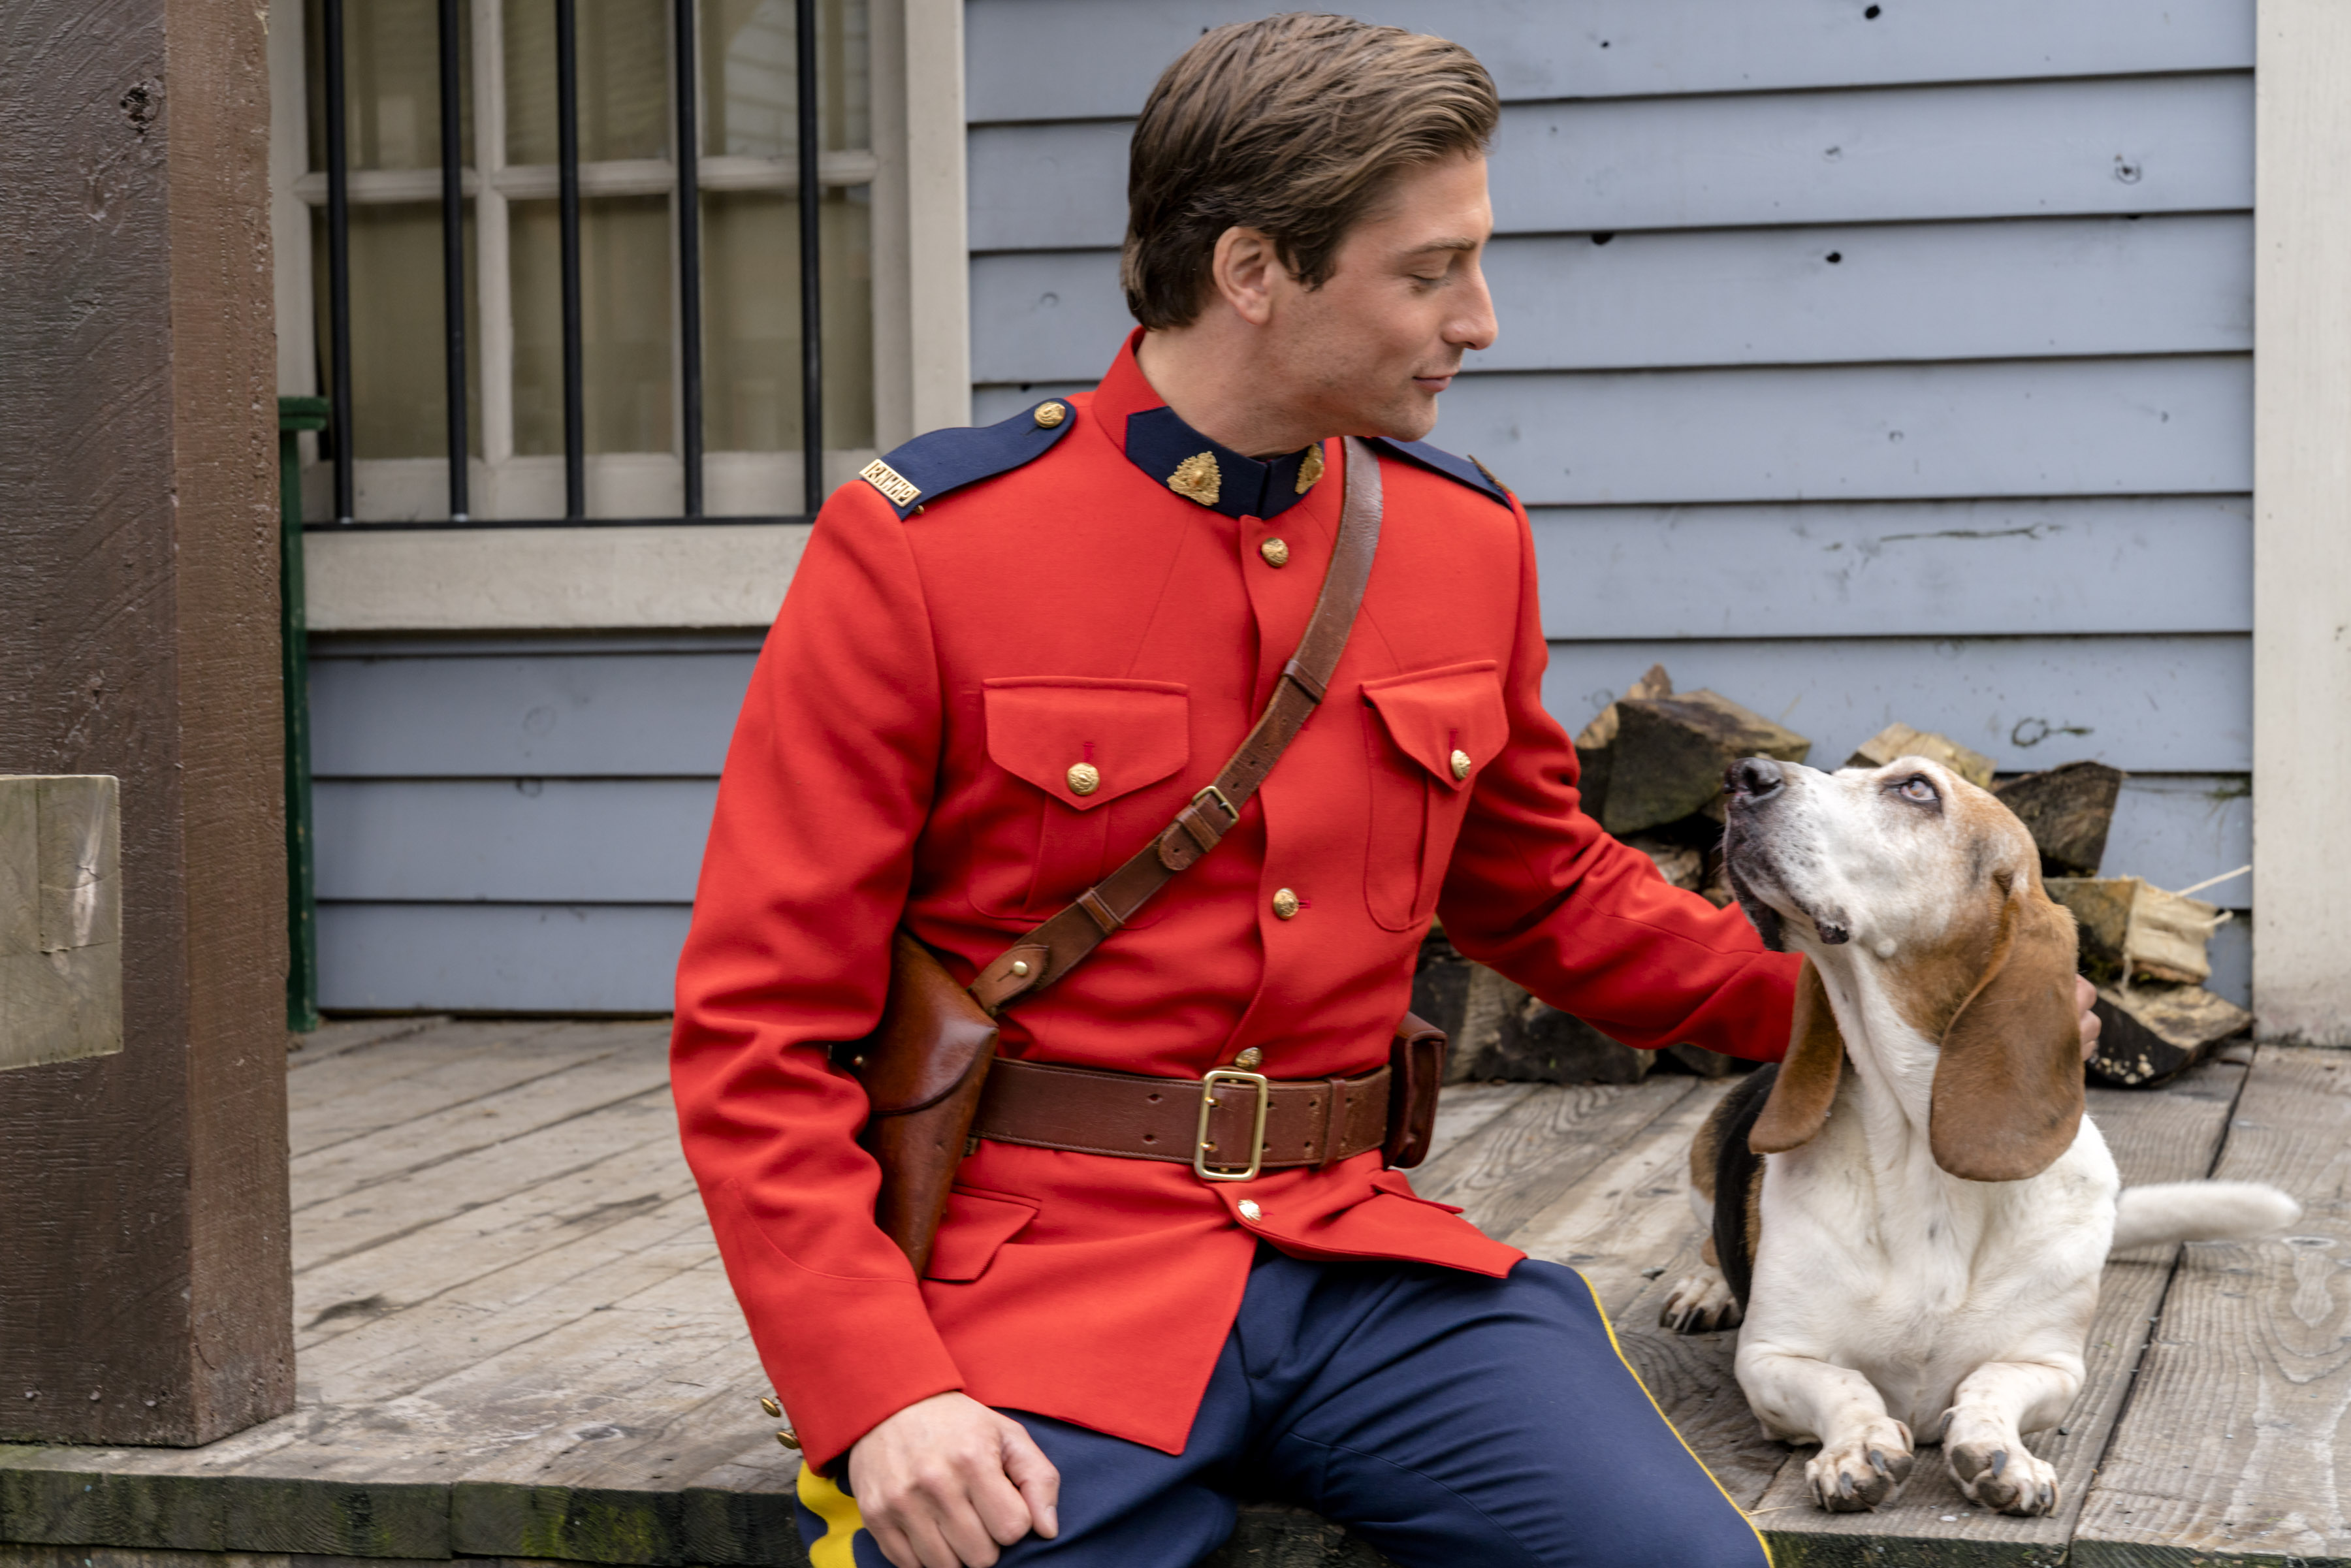 Jack, in a red jacket, petting a dog in an episode of 'When Calls the Heart'